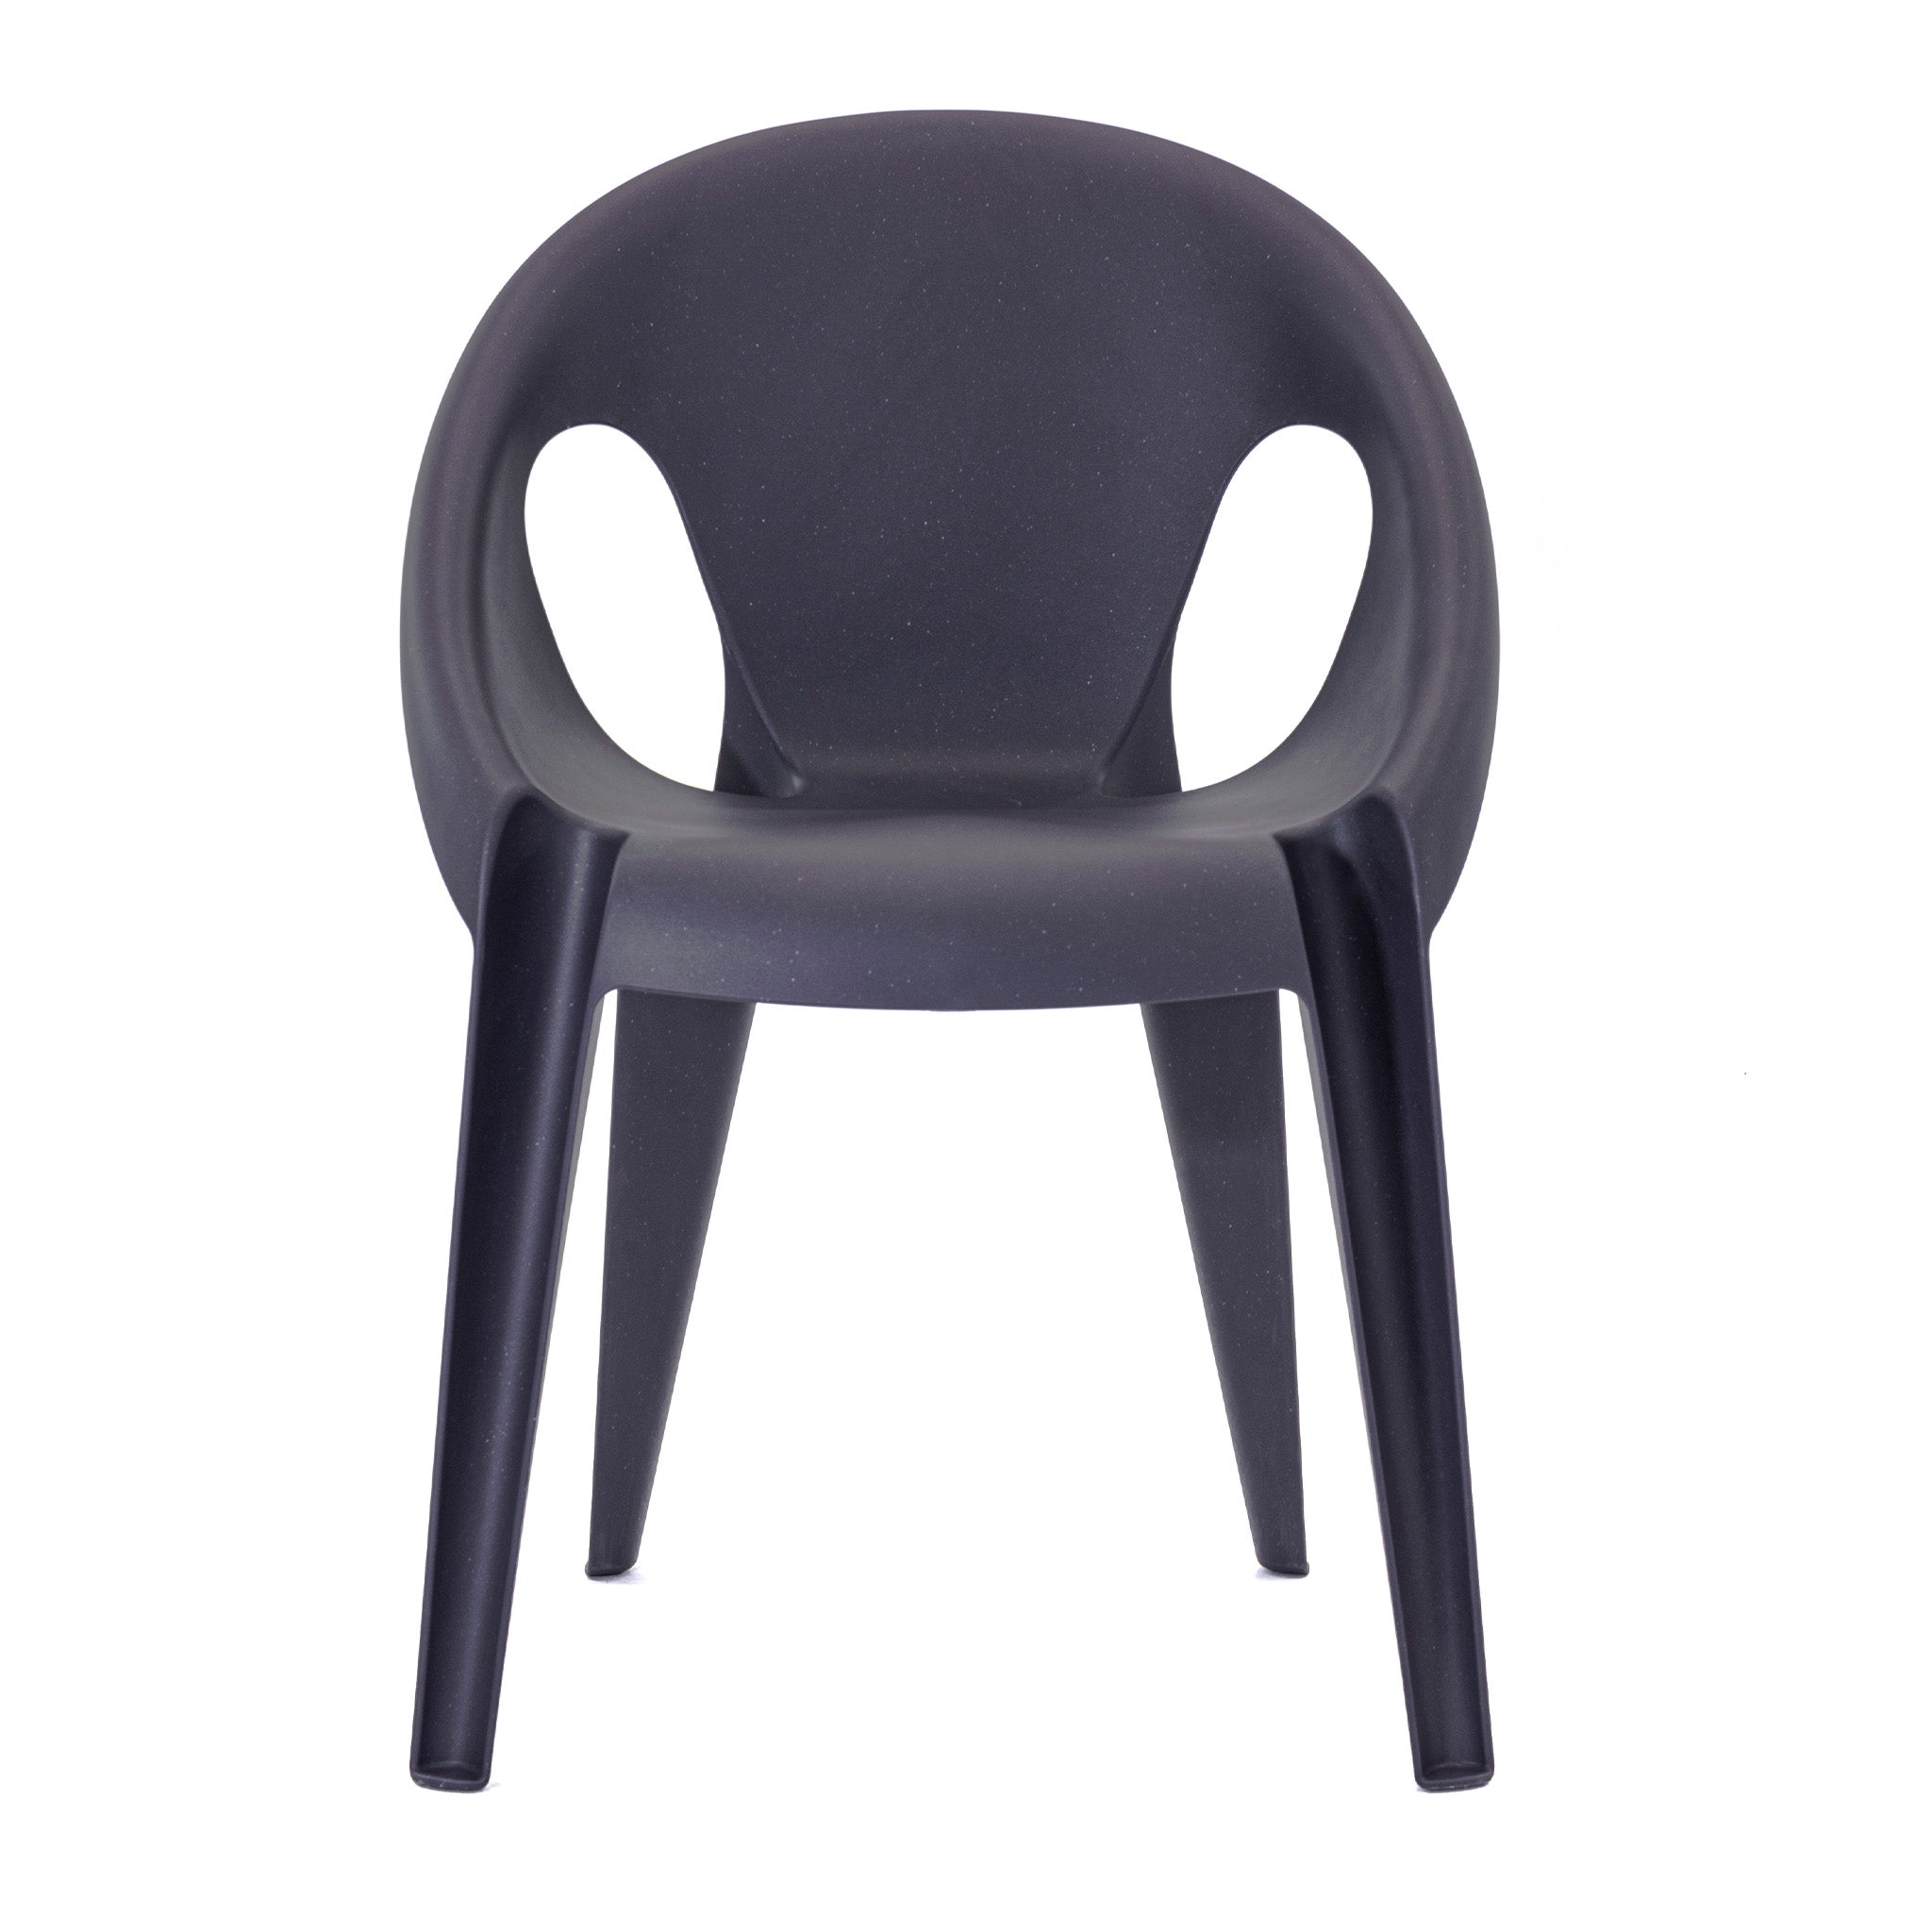 Bell Chair by Konstantin Grcic for Magis